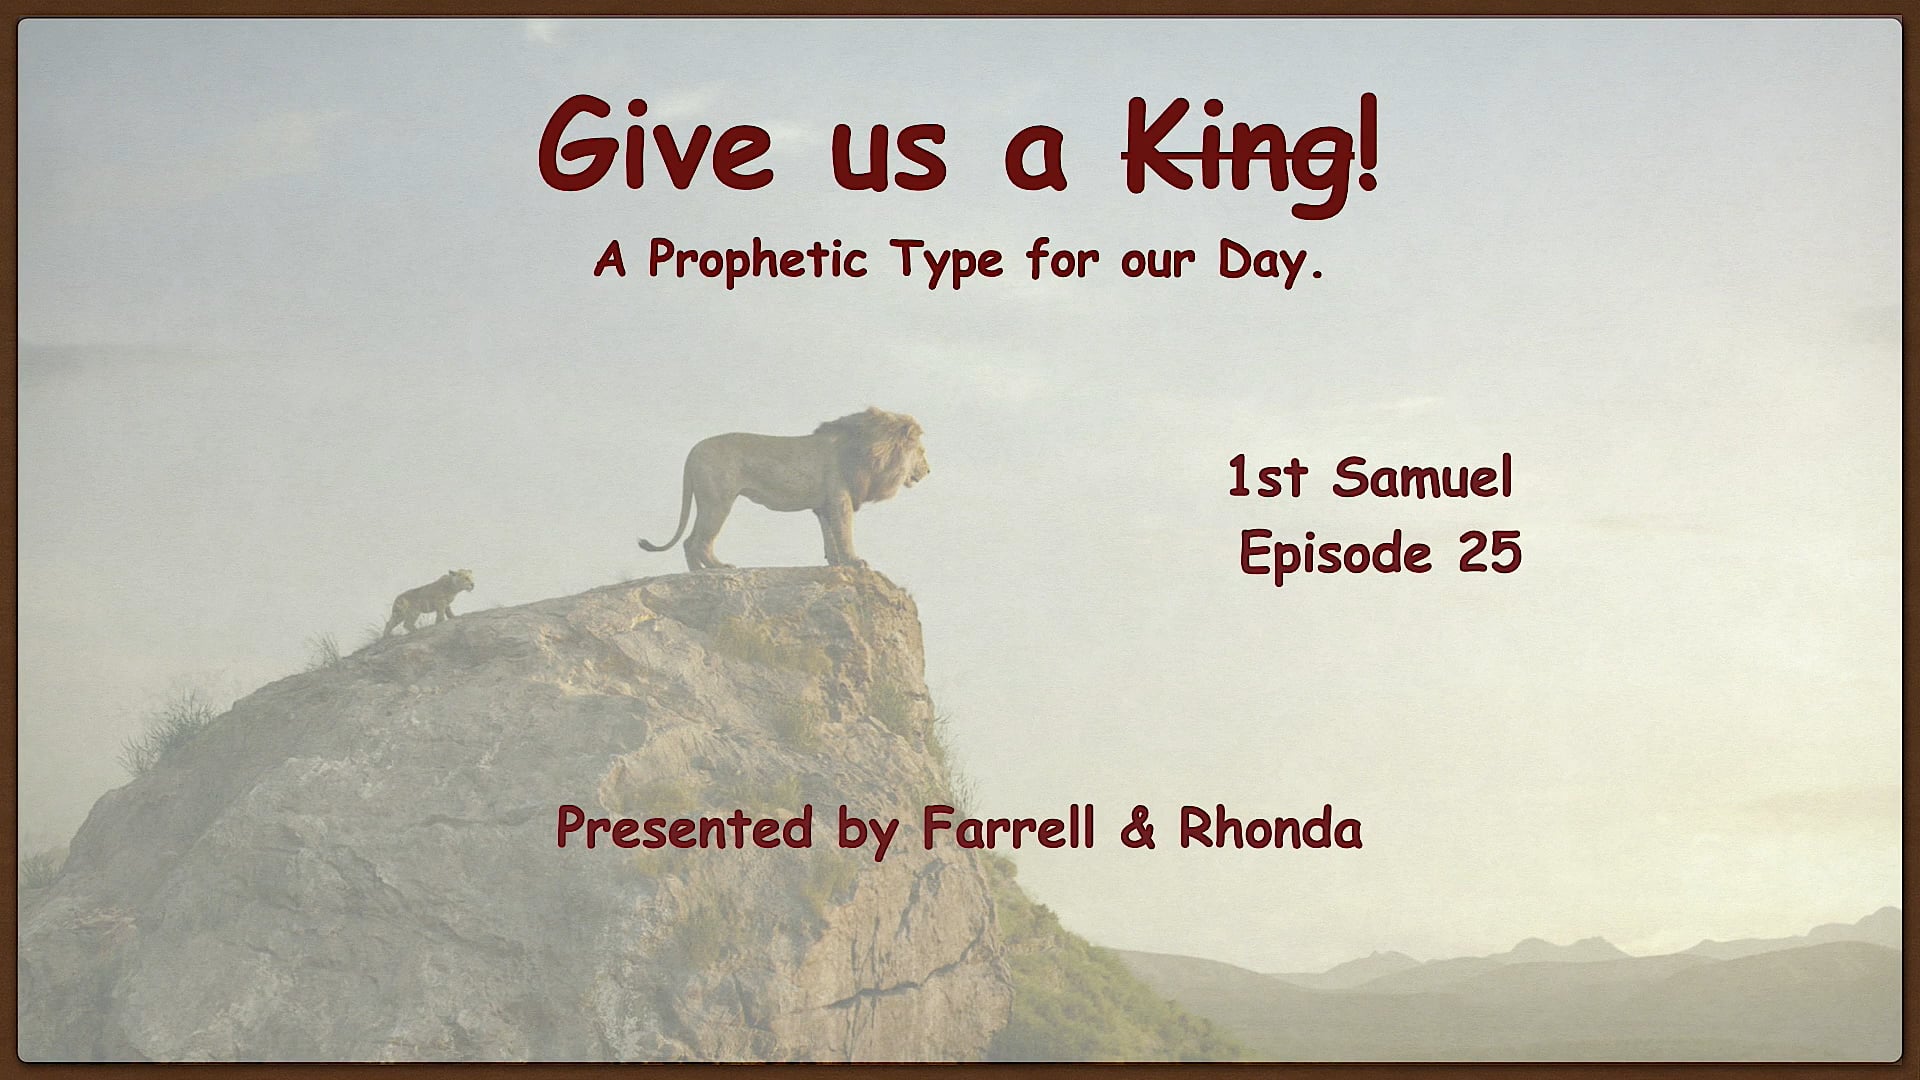 EP 25 Samuel 1 "Give Us A King!" Come Follow Me - Farrell Pickering